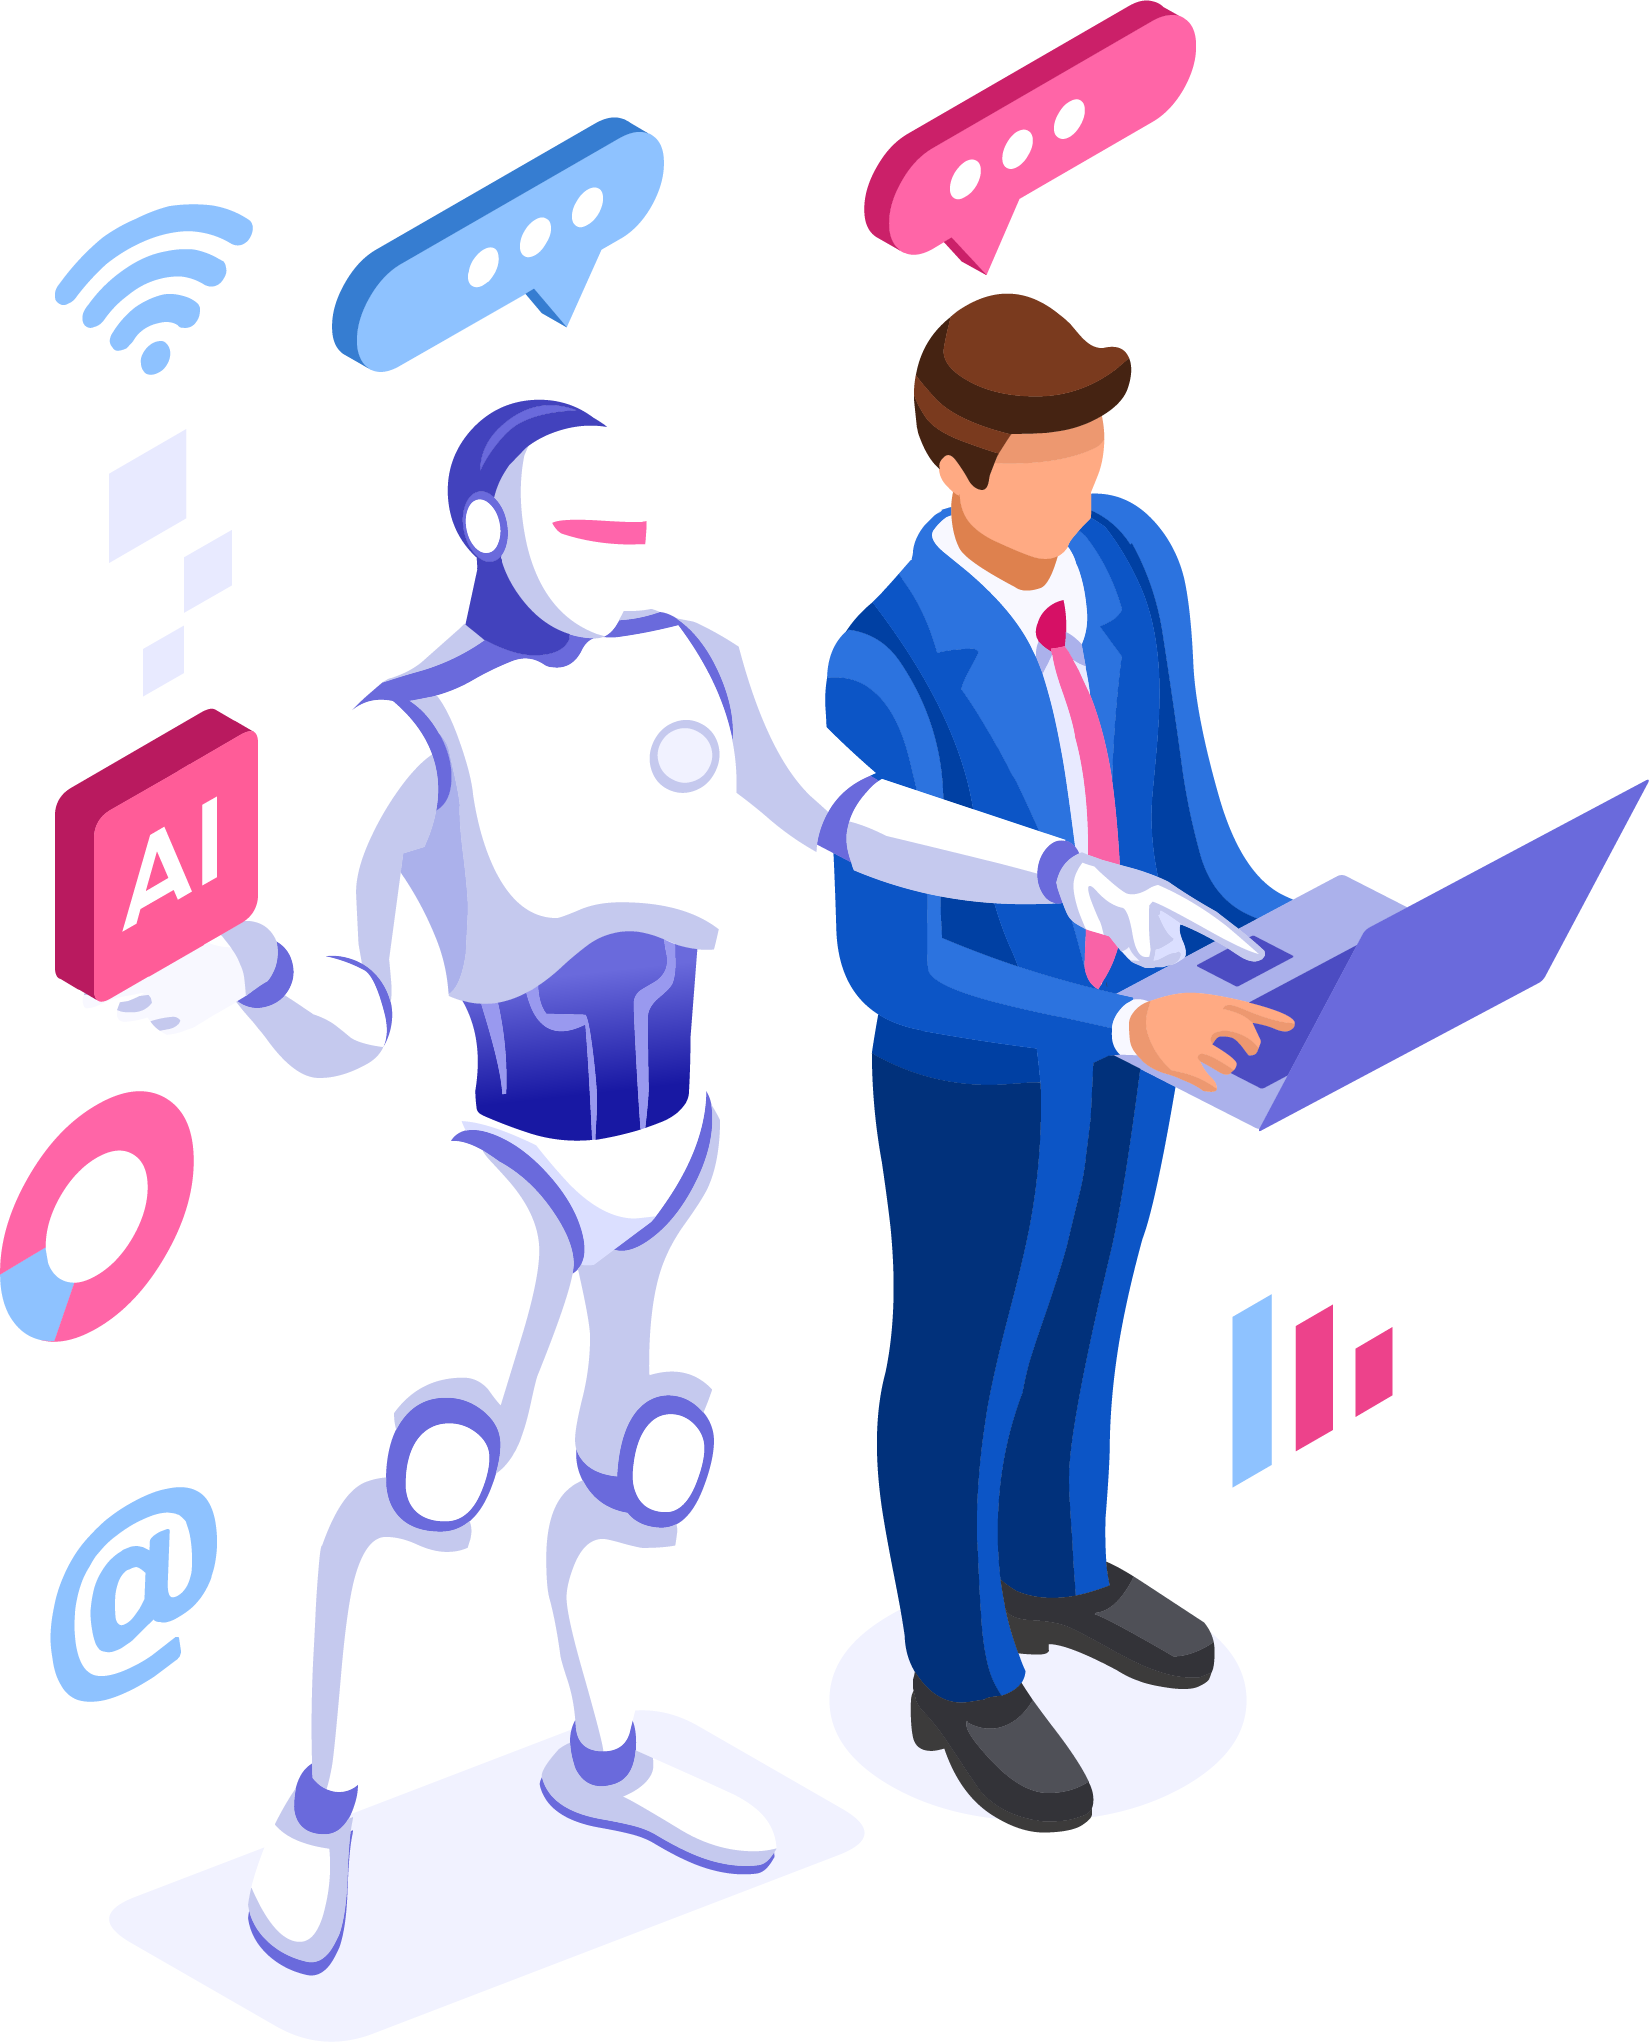 Improved business efficiency with language AI